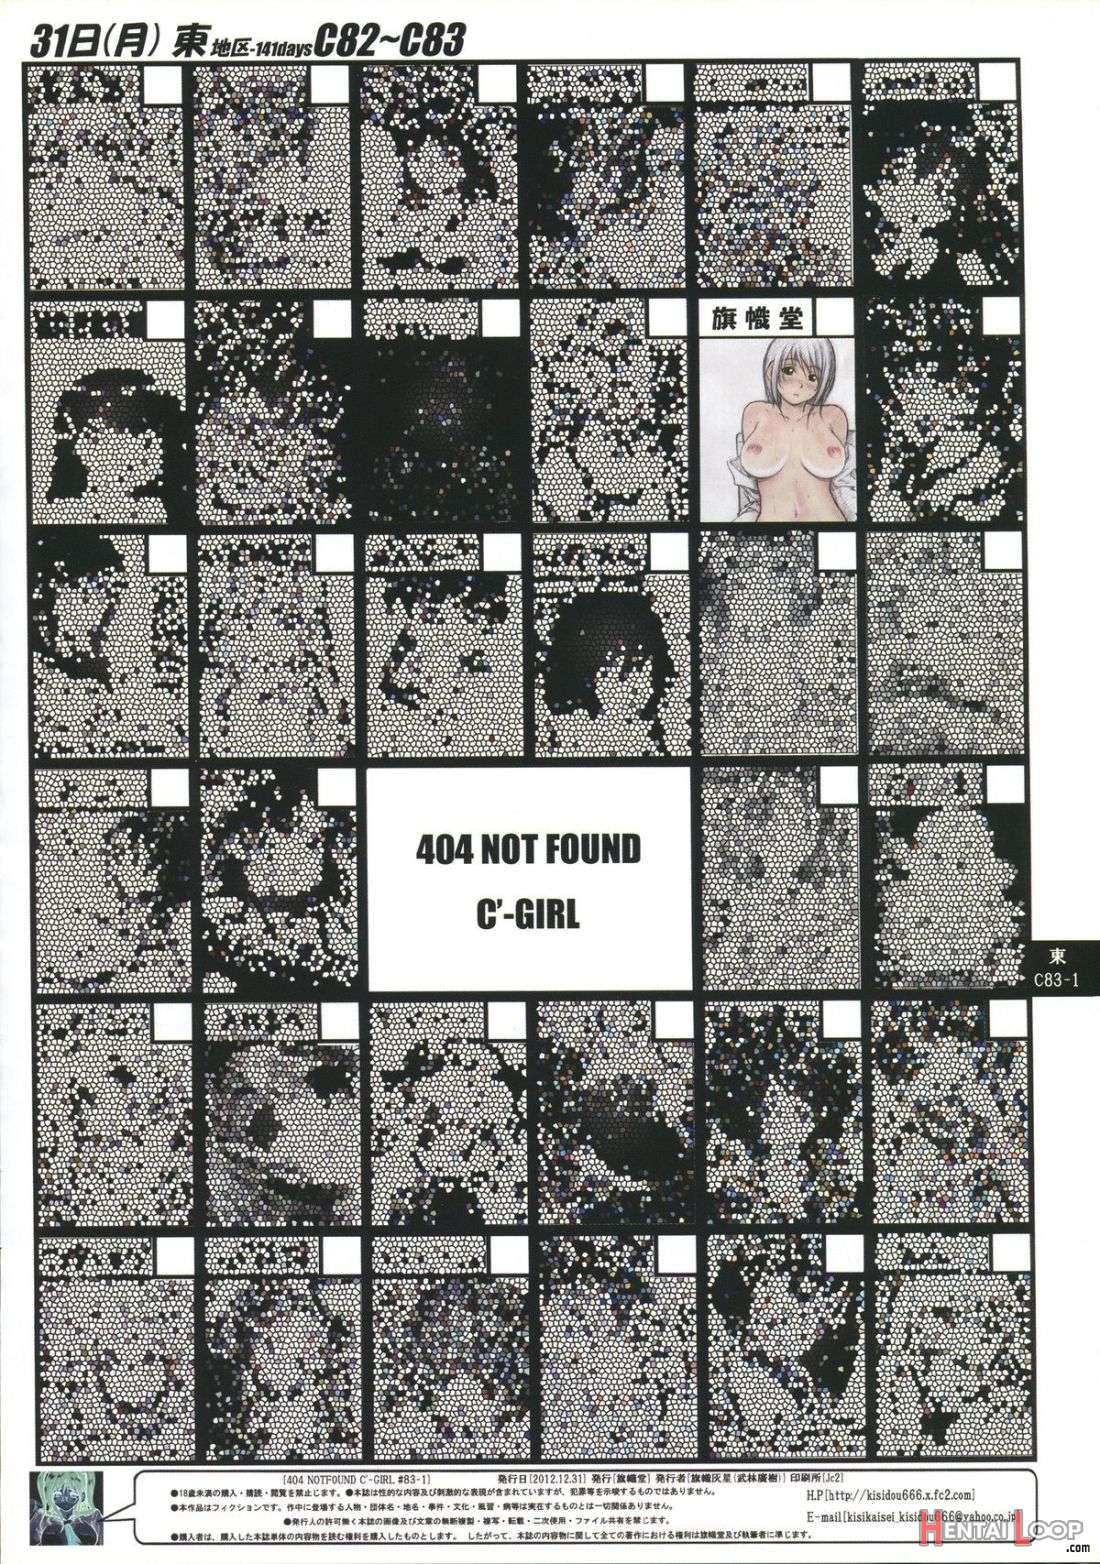 404 Not Found C’-girl #83-1 page 2